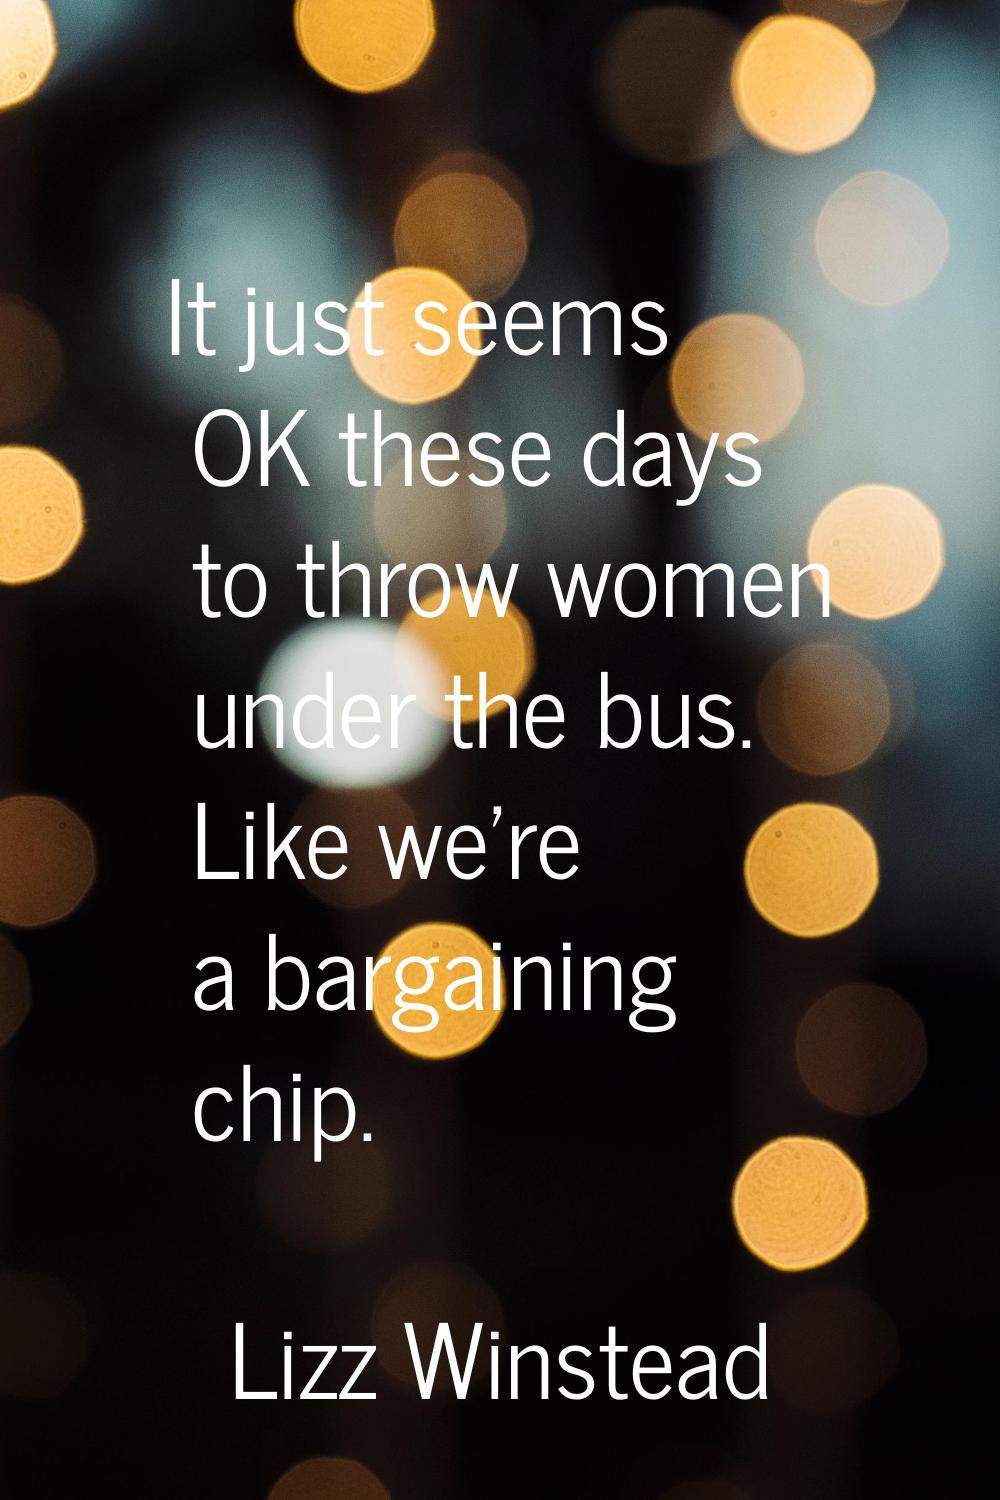 It just seems OK these days to throw women under the bus. Like we're a bargaining chip.